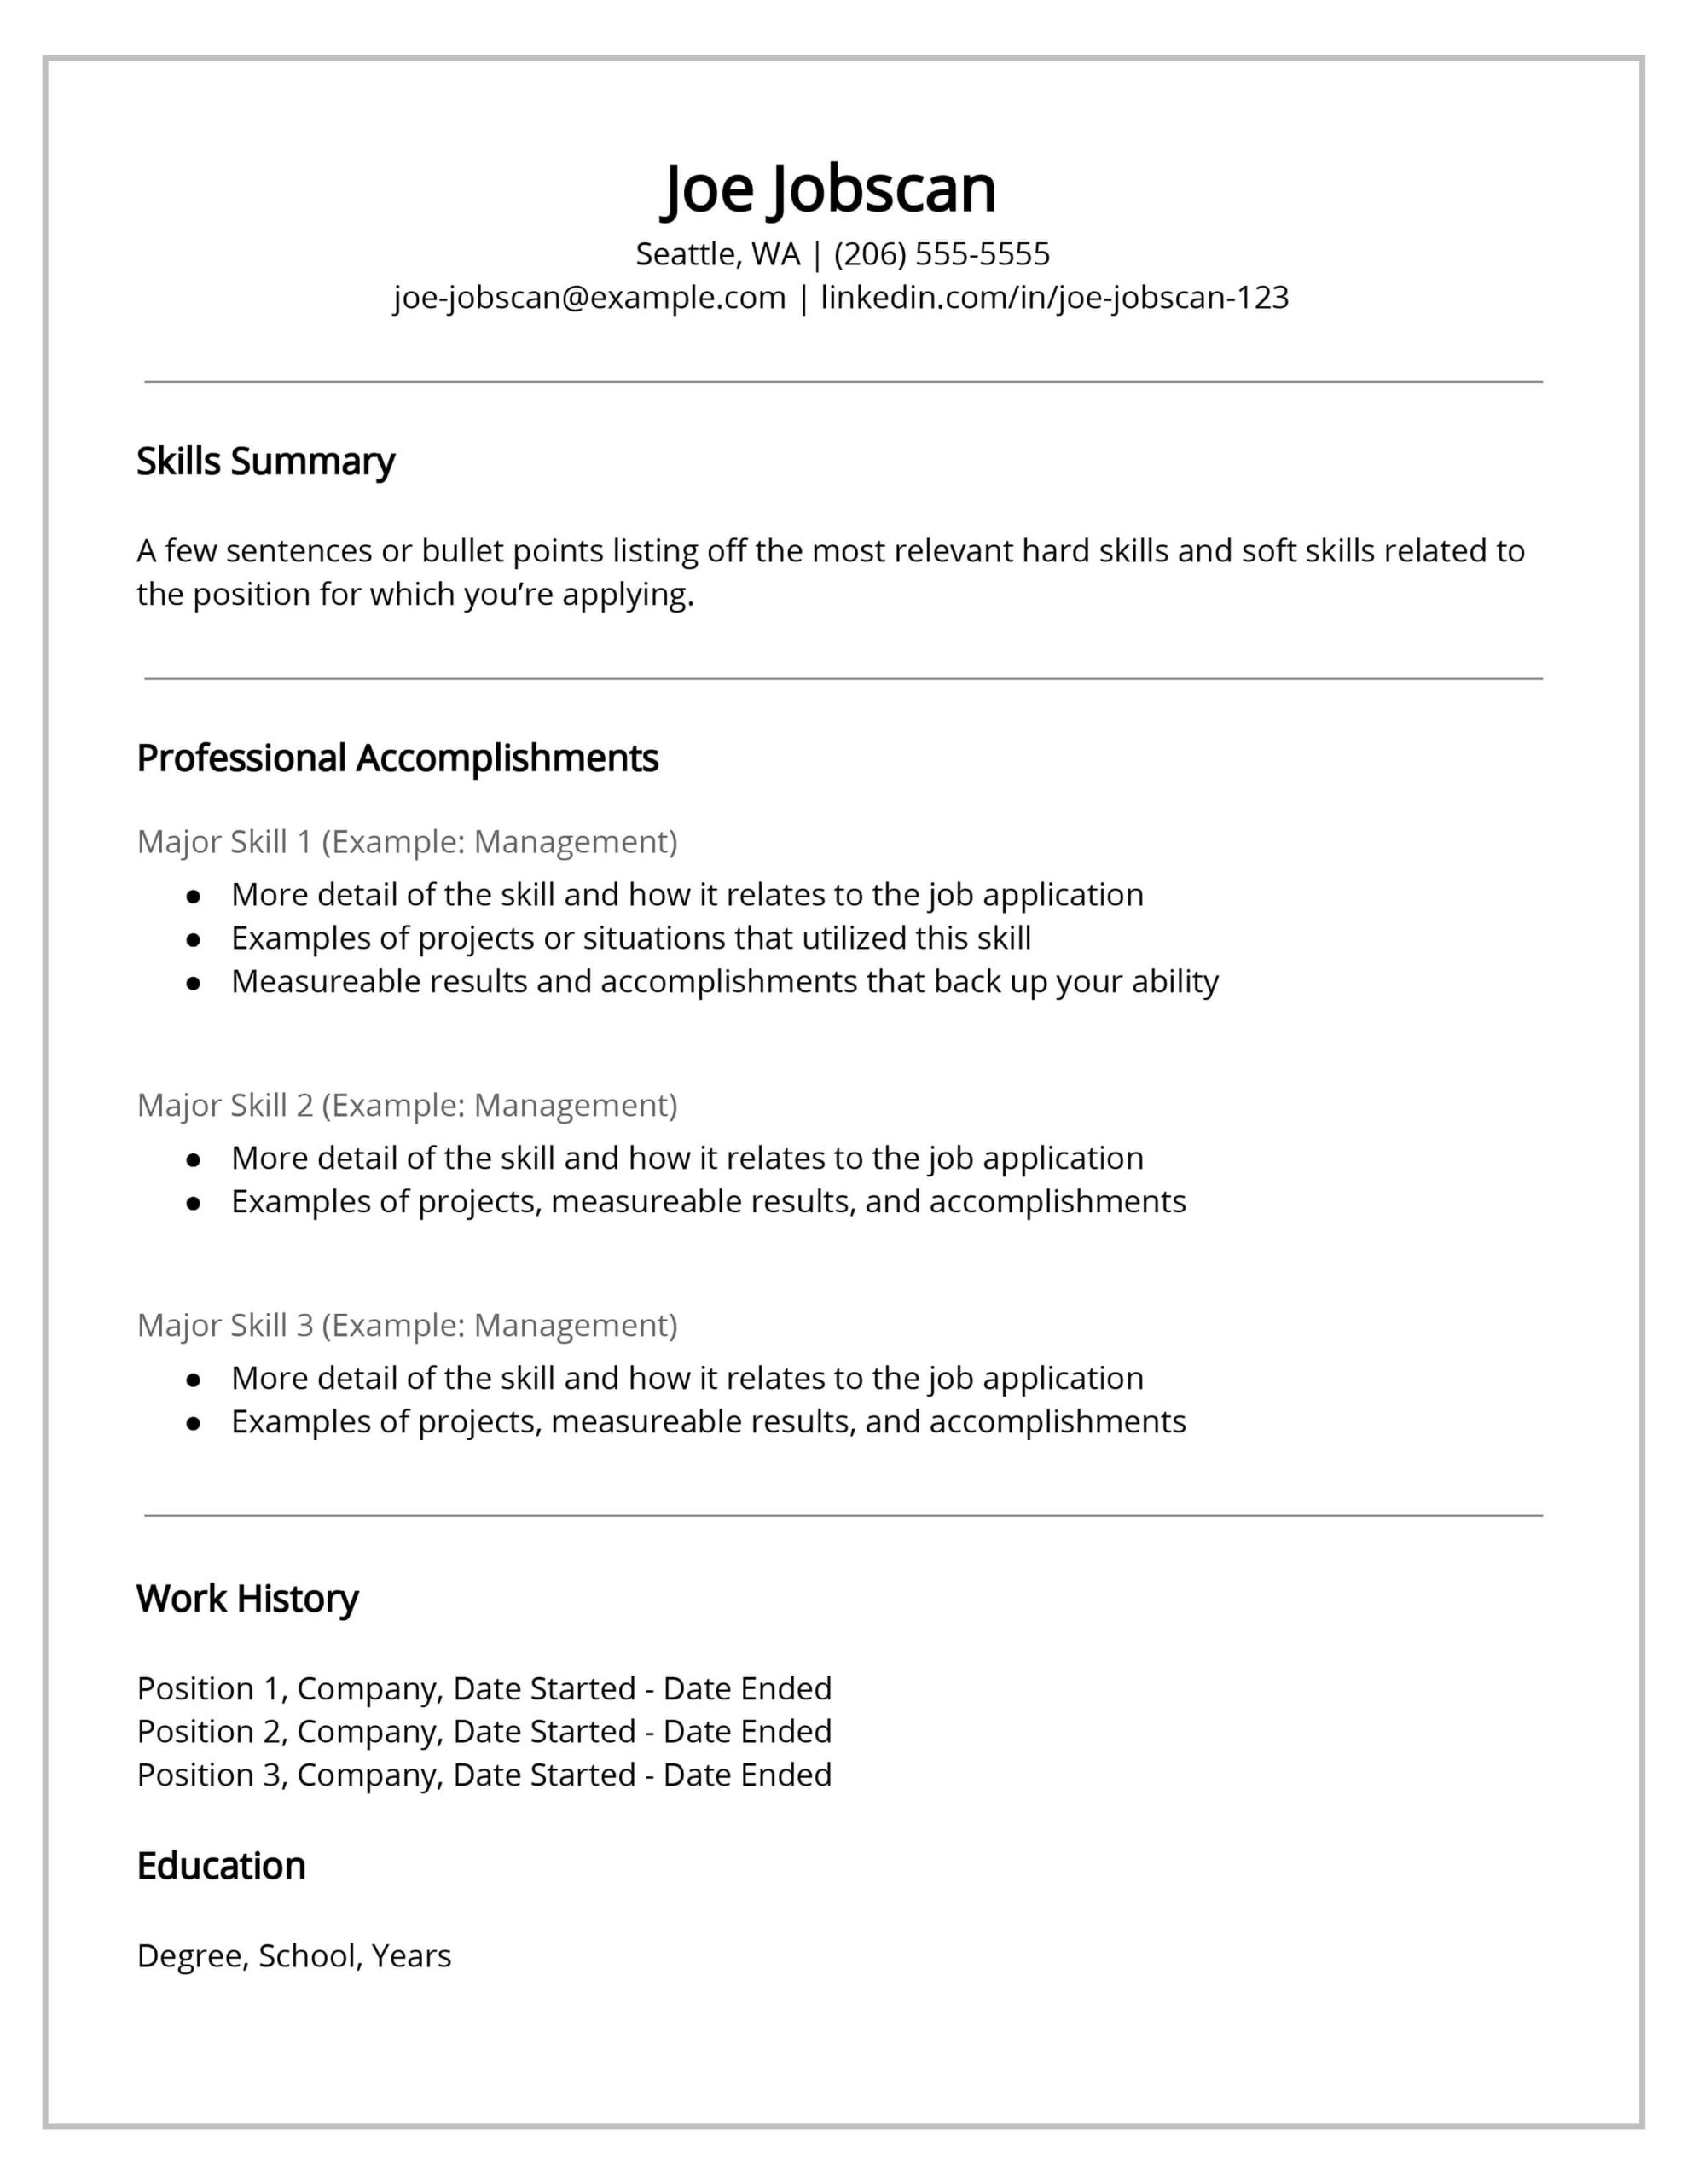 Sample Of A Good Functional Resume Recruiters Hate the Functional Resume formatâdo This Instead